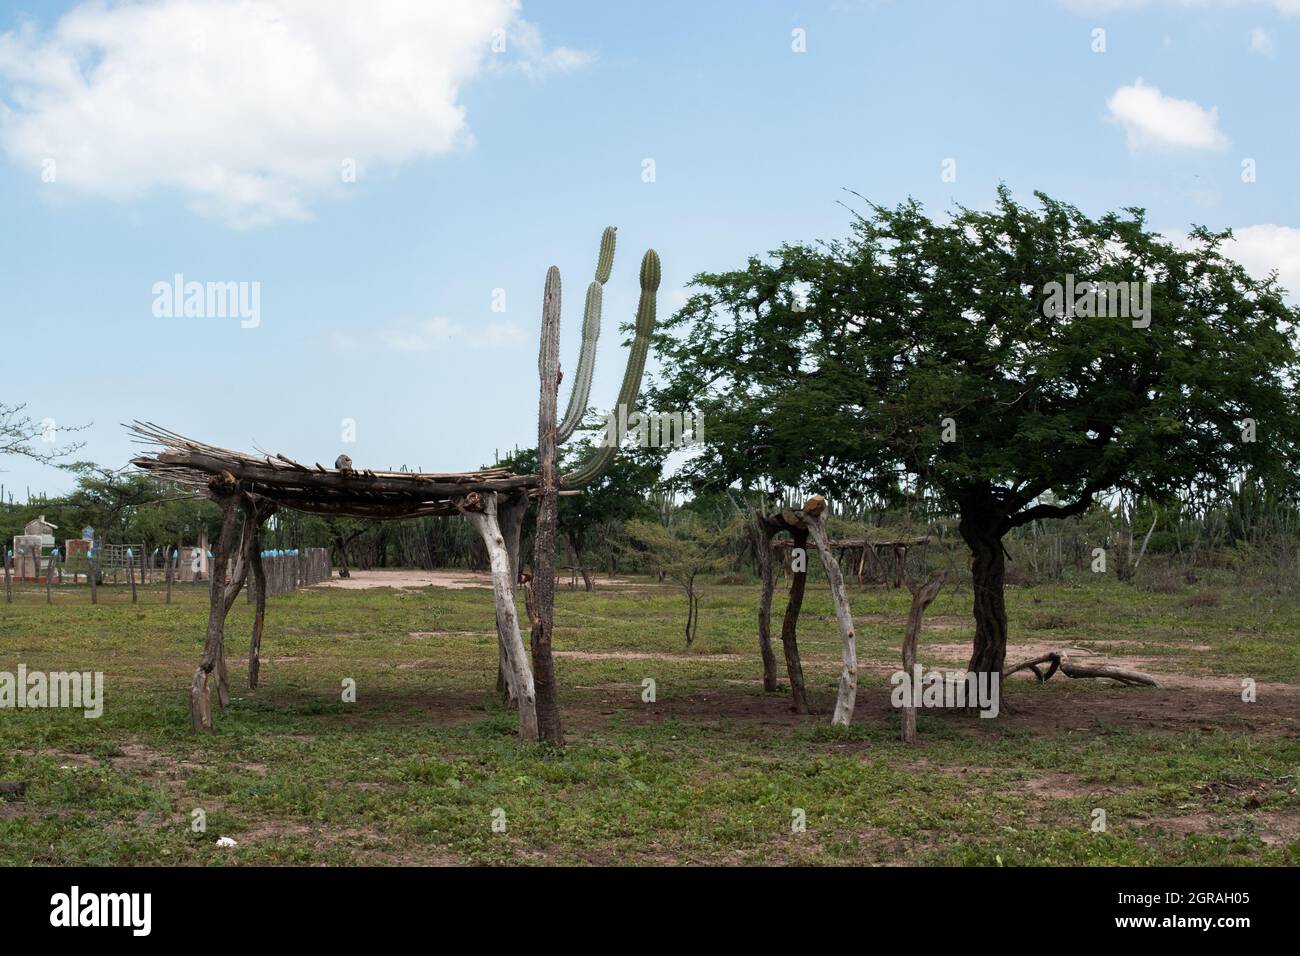 Mayapo, Colombia. 26th Sep, 2021. A view of a hut beside a tree built with a cactus tree during a Humanitarian Mission developed by 'De Corazon Guajira' in Mayapo at La Guajira - Colombia were they visited the Wayuu indigenous communities 'Pactalia, Poromana, Perrohuila' on September 26, 2021. The Guajira region in Colombia is the poorest region in Colombia, with its people commongly living without drinkable water, electricity and food. Credit: Long Visual Press/Alamy Live News Stock Photo